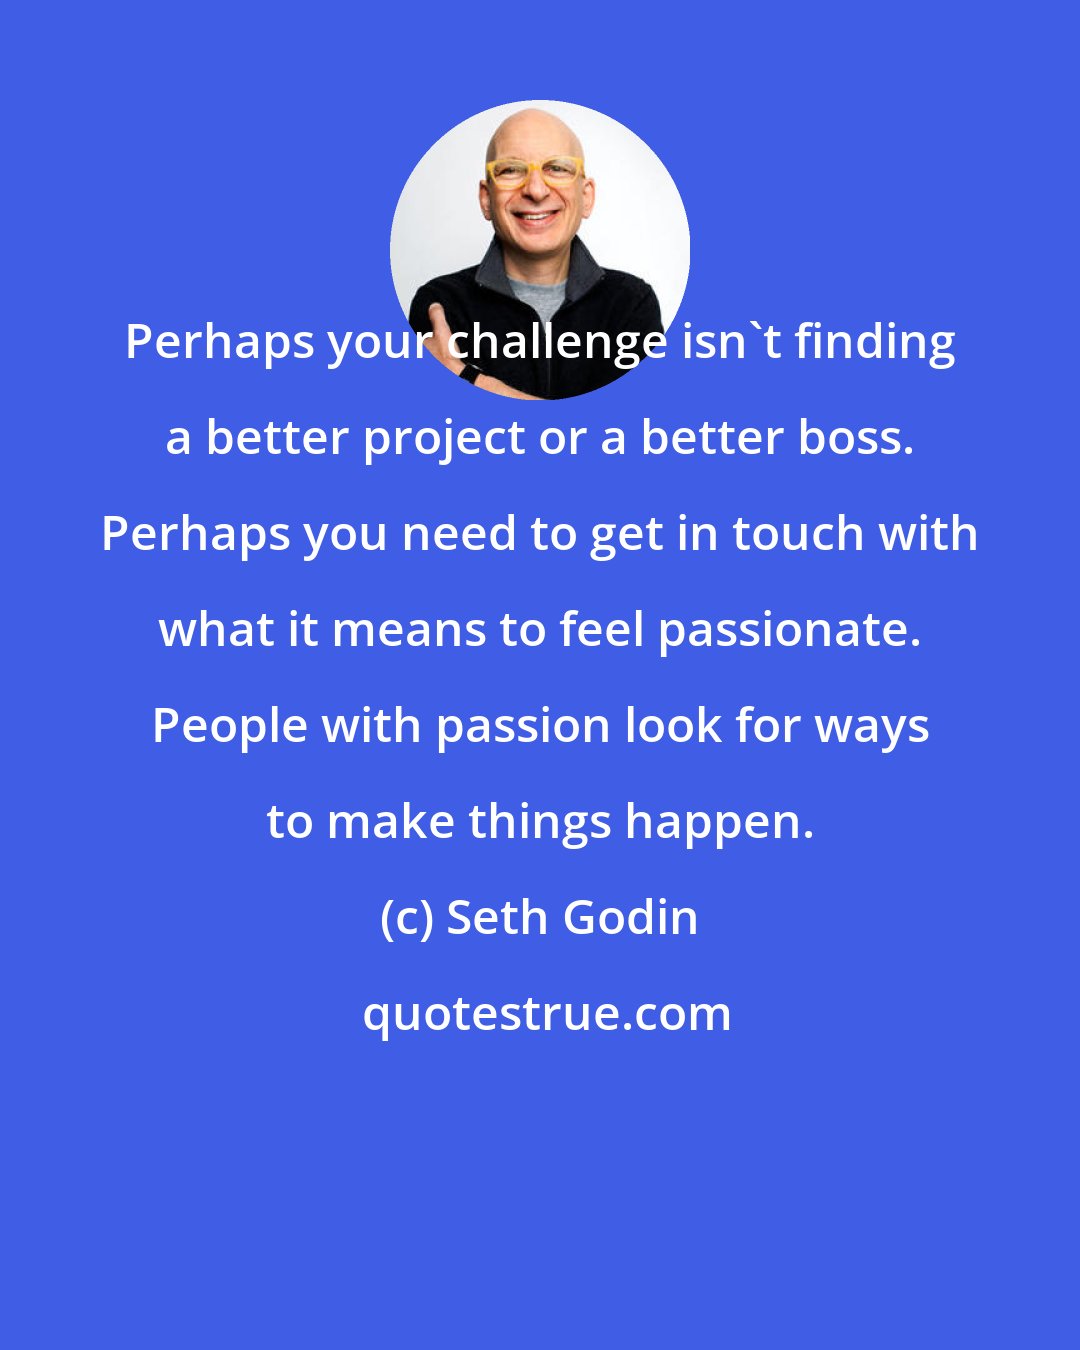 Seth Godin: Perhaps your challenge isn't finding a better project or a better boss. Perhaps you need to get in touch with what it means to feel passionate. People with passion look for ways to make things happen.